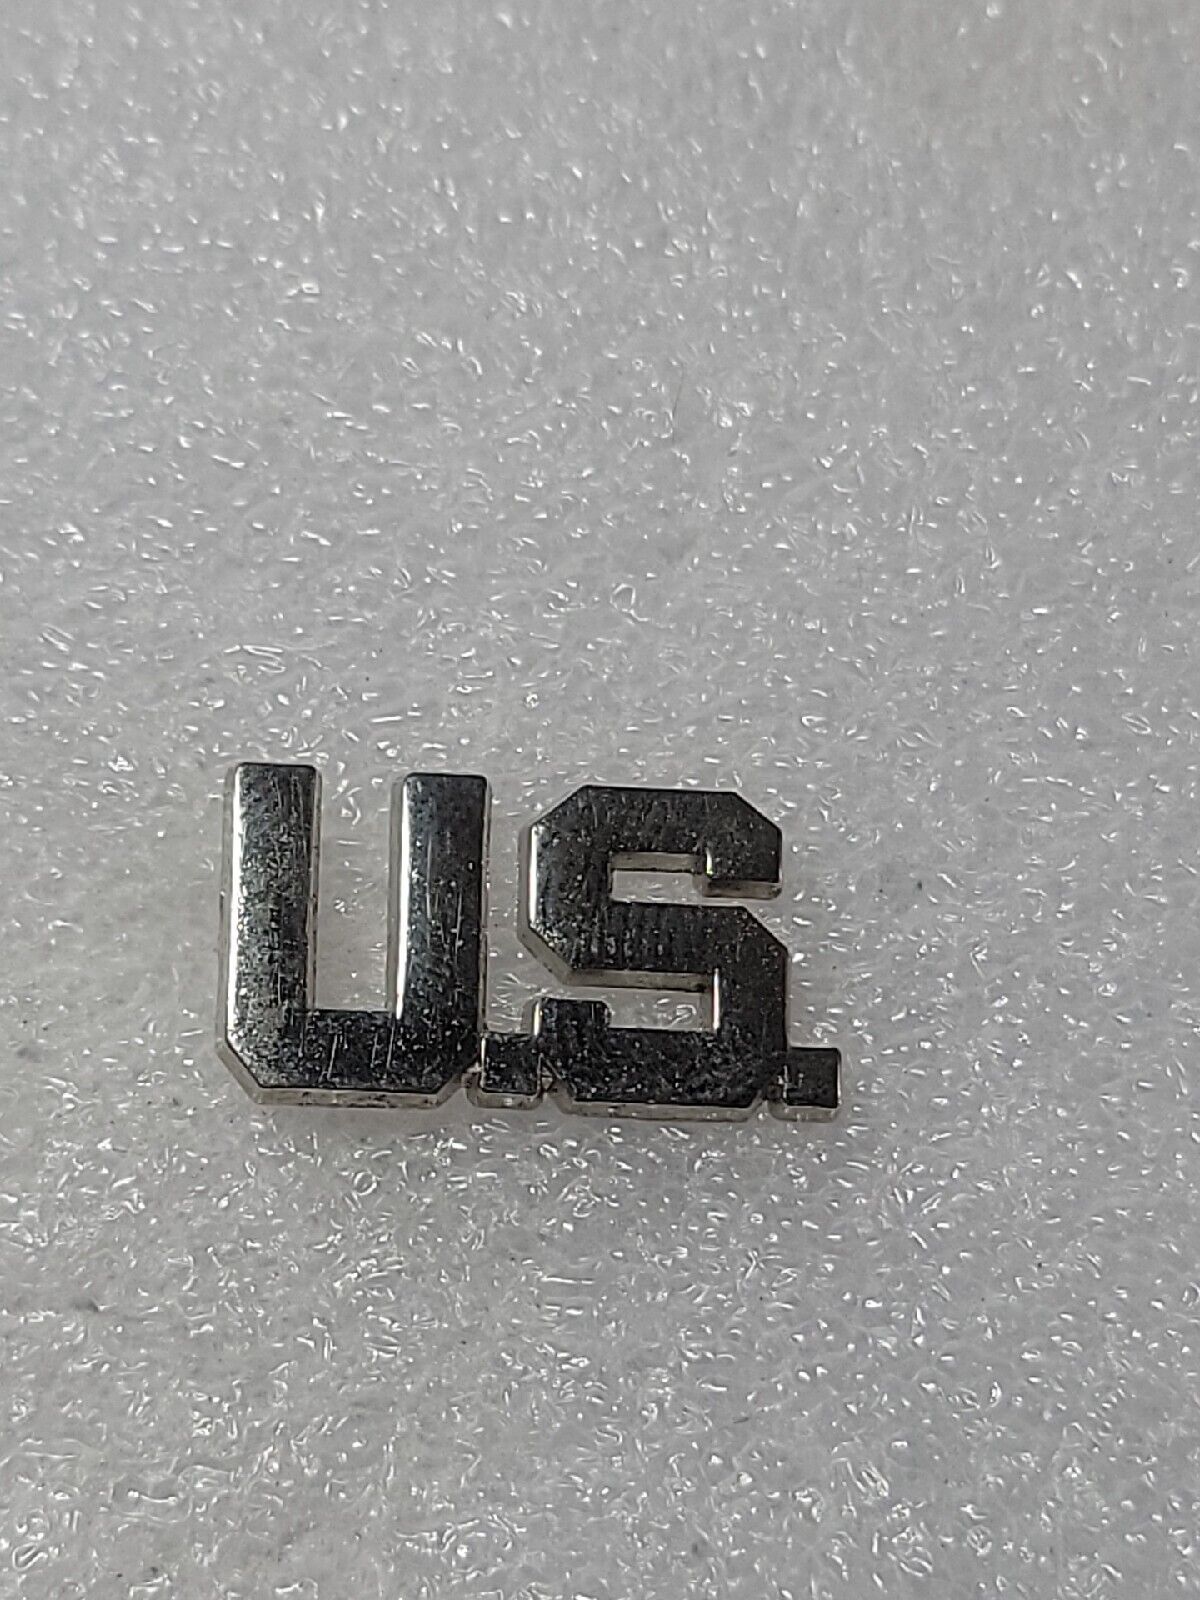 U.S. Letters Lapel Pin Insignia Collar Device Military Officer Dual Clutch Back